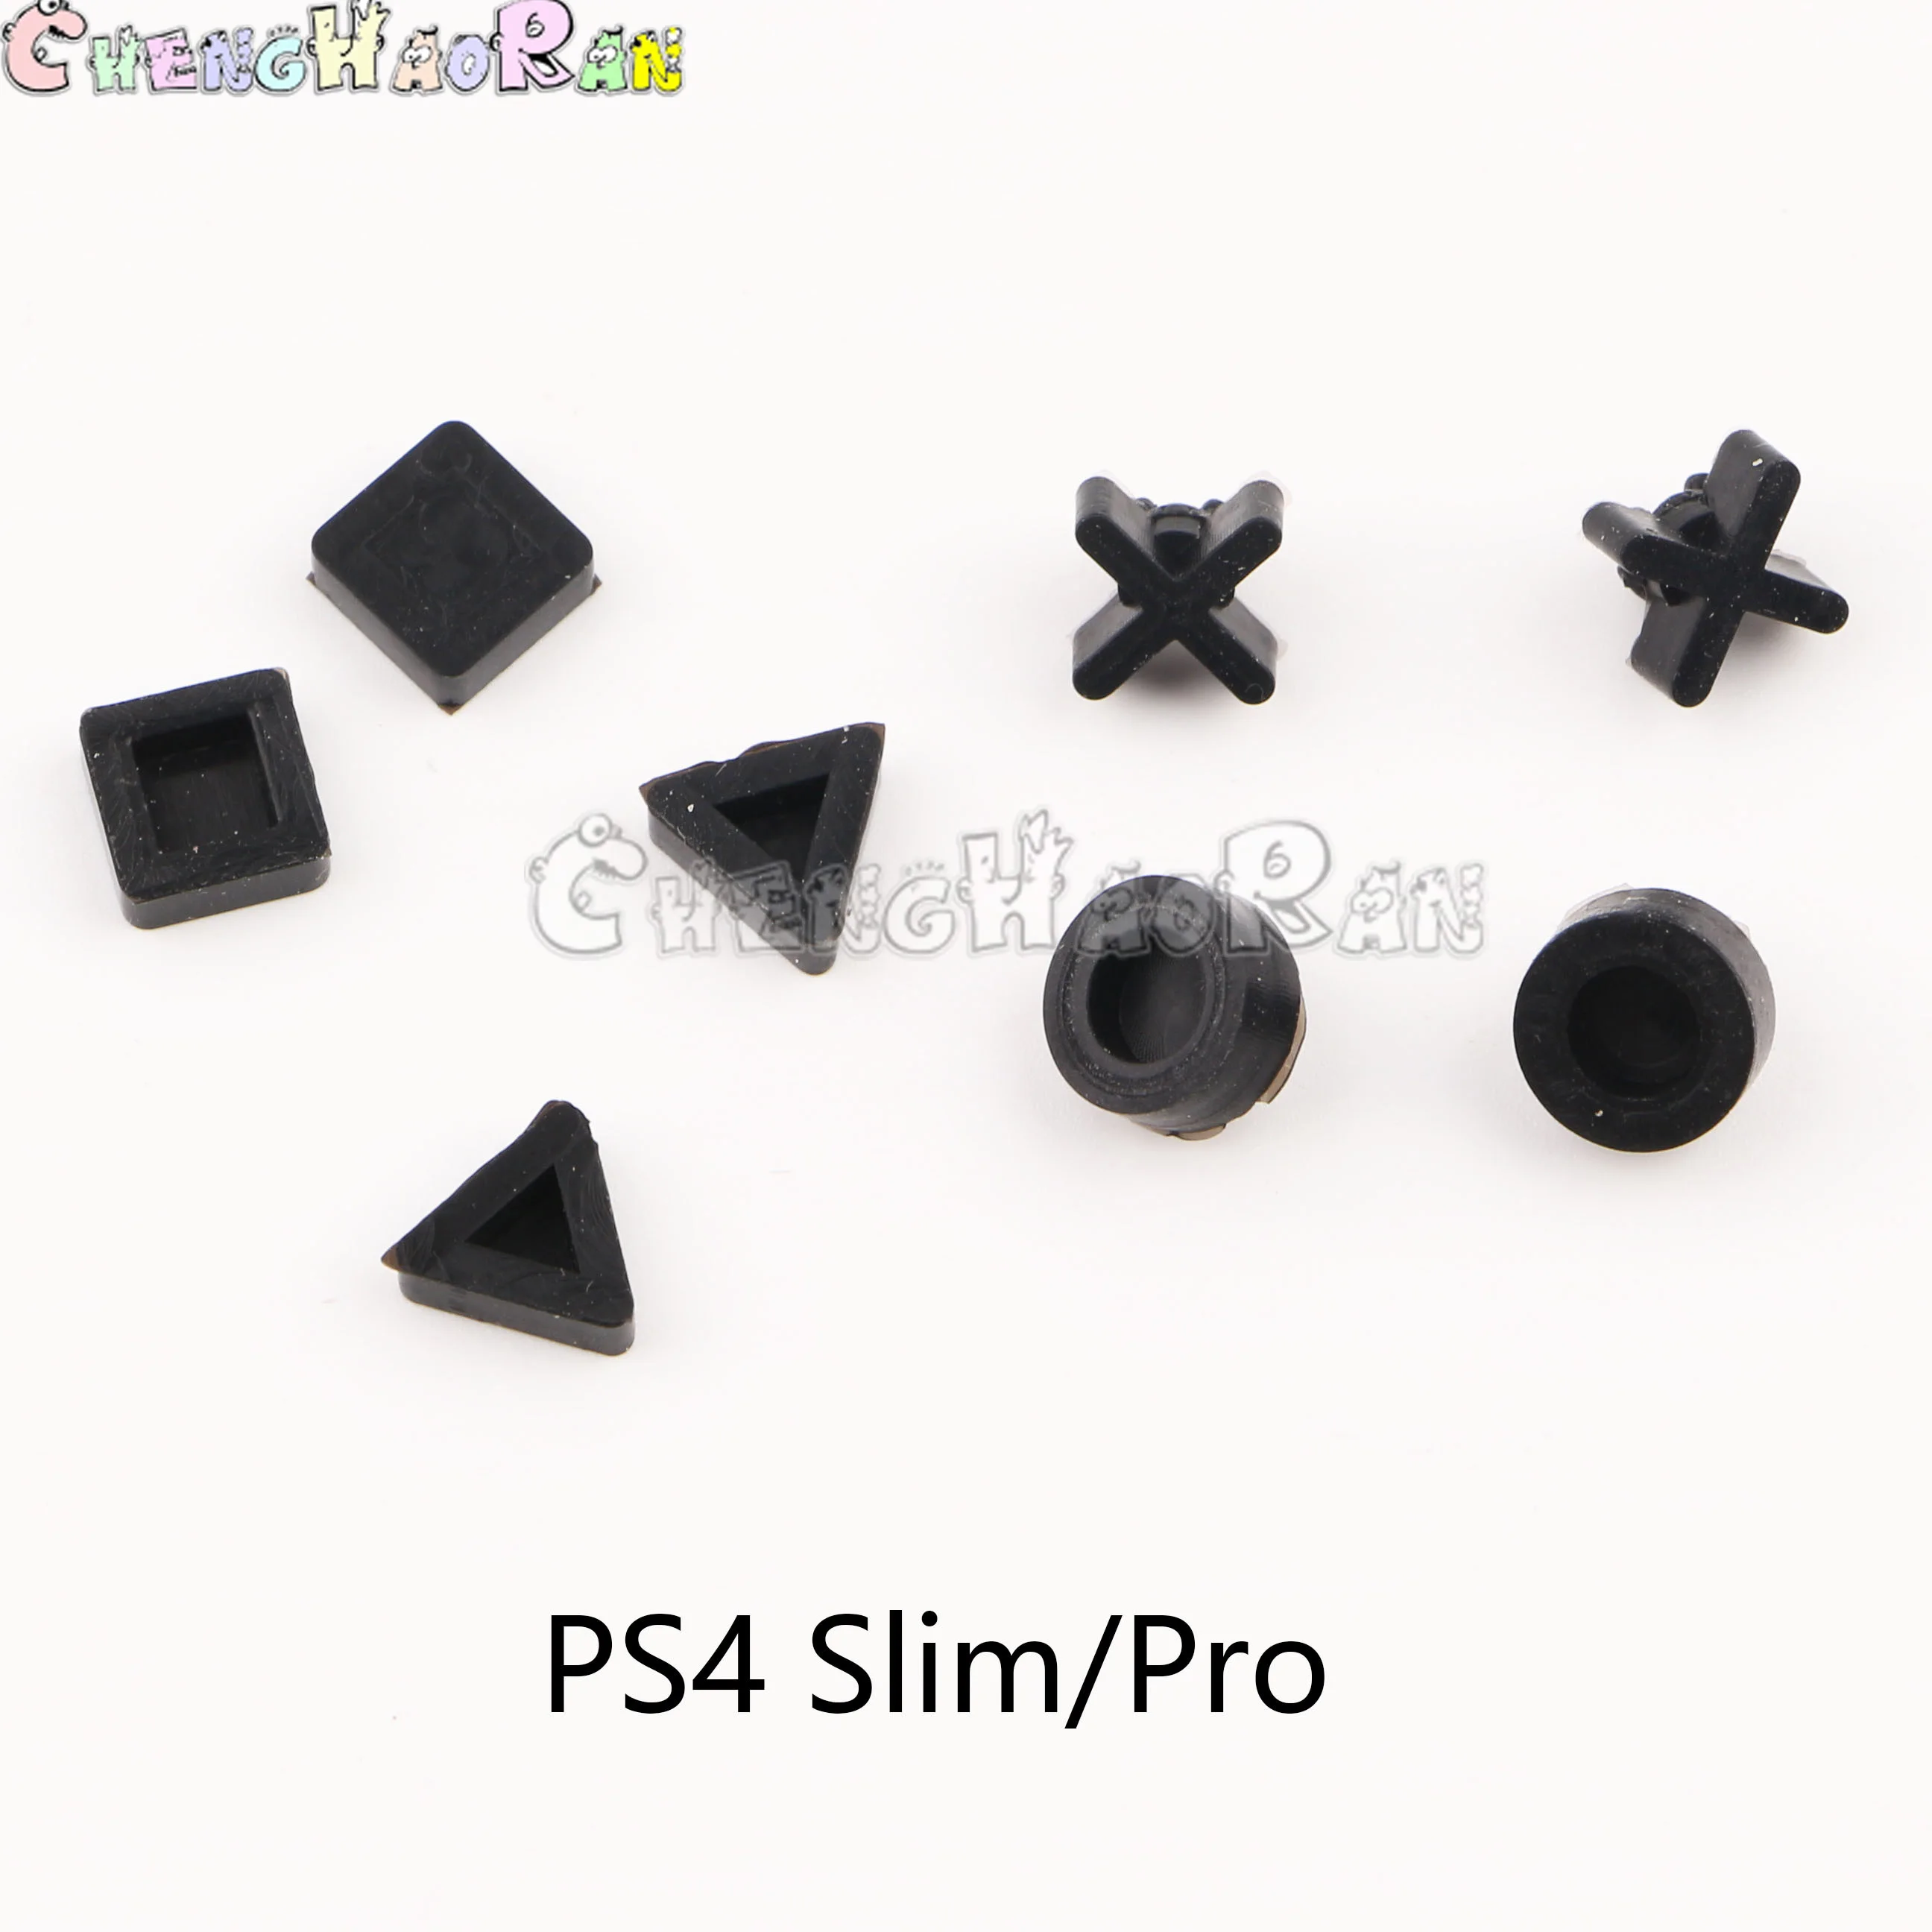 1set Silicone Bottom Rubber Feet Pads Cover Cap For Sony PS4 PS 4 Pro Slim Console Housing Case Rubber Feet Cover